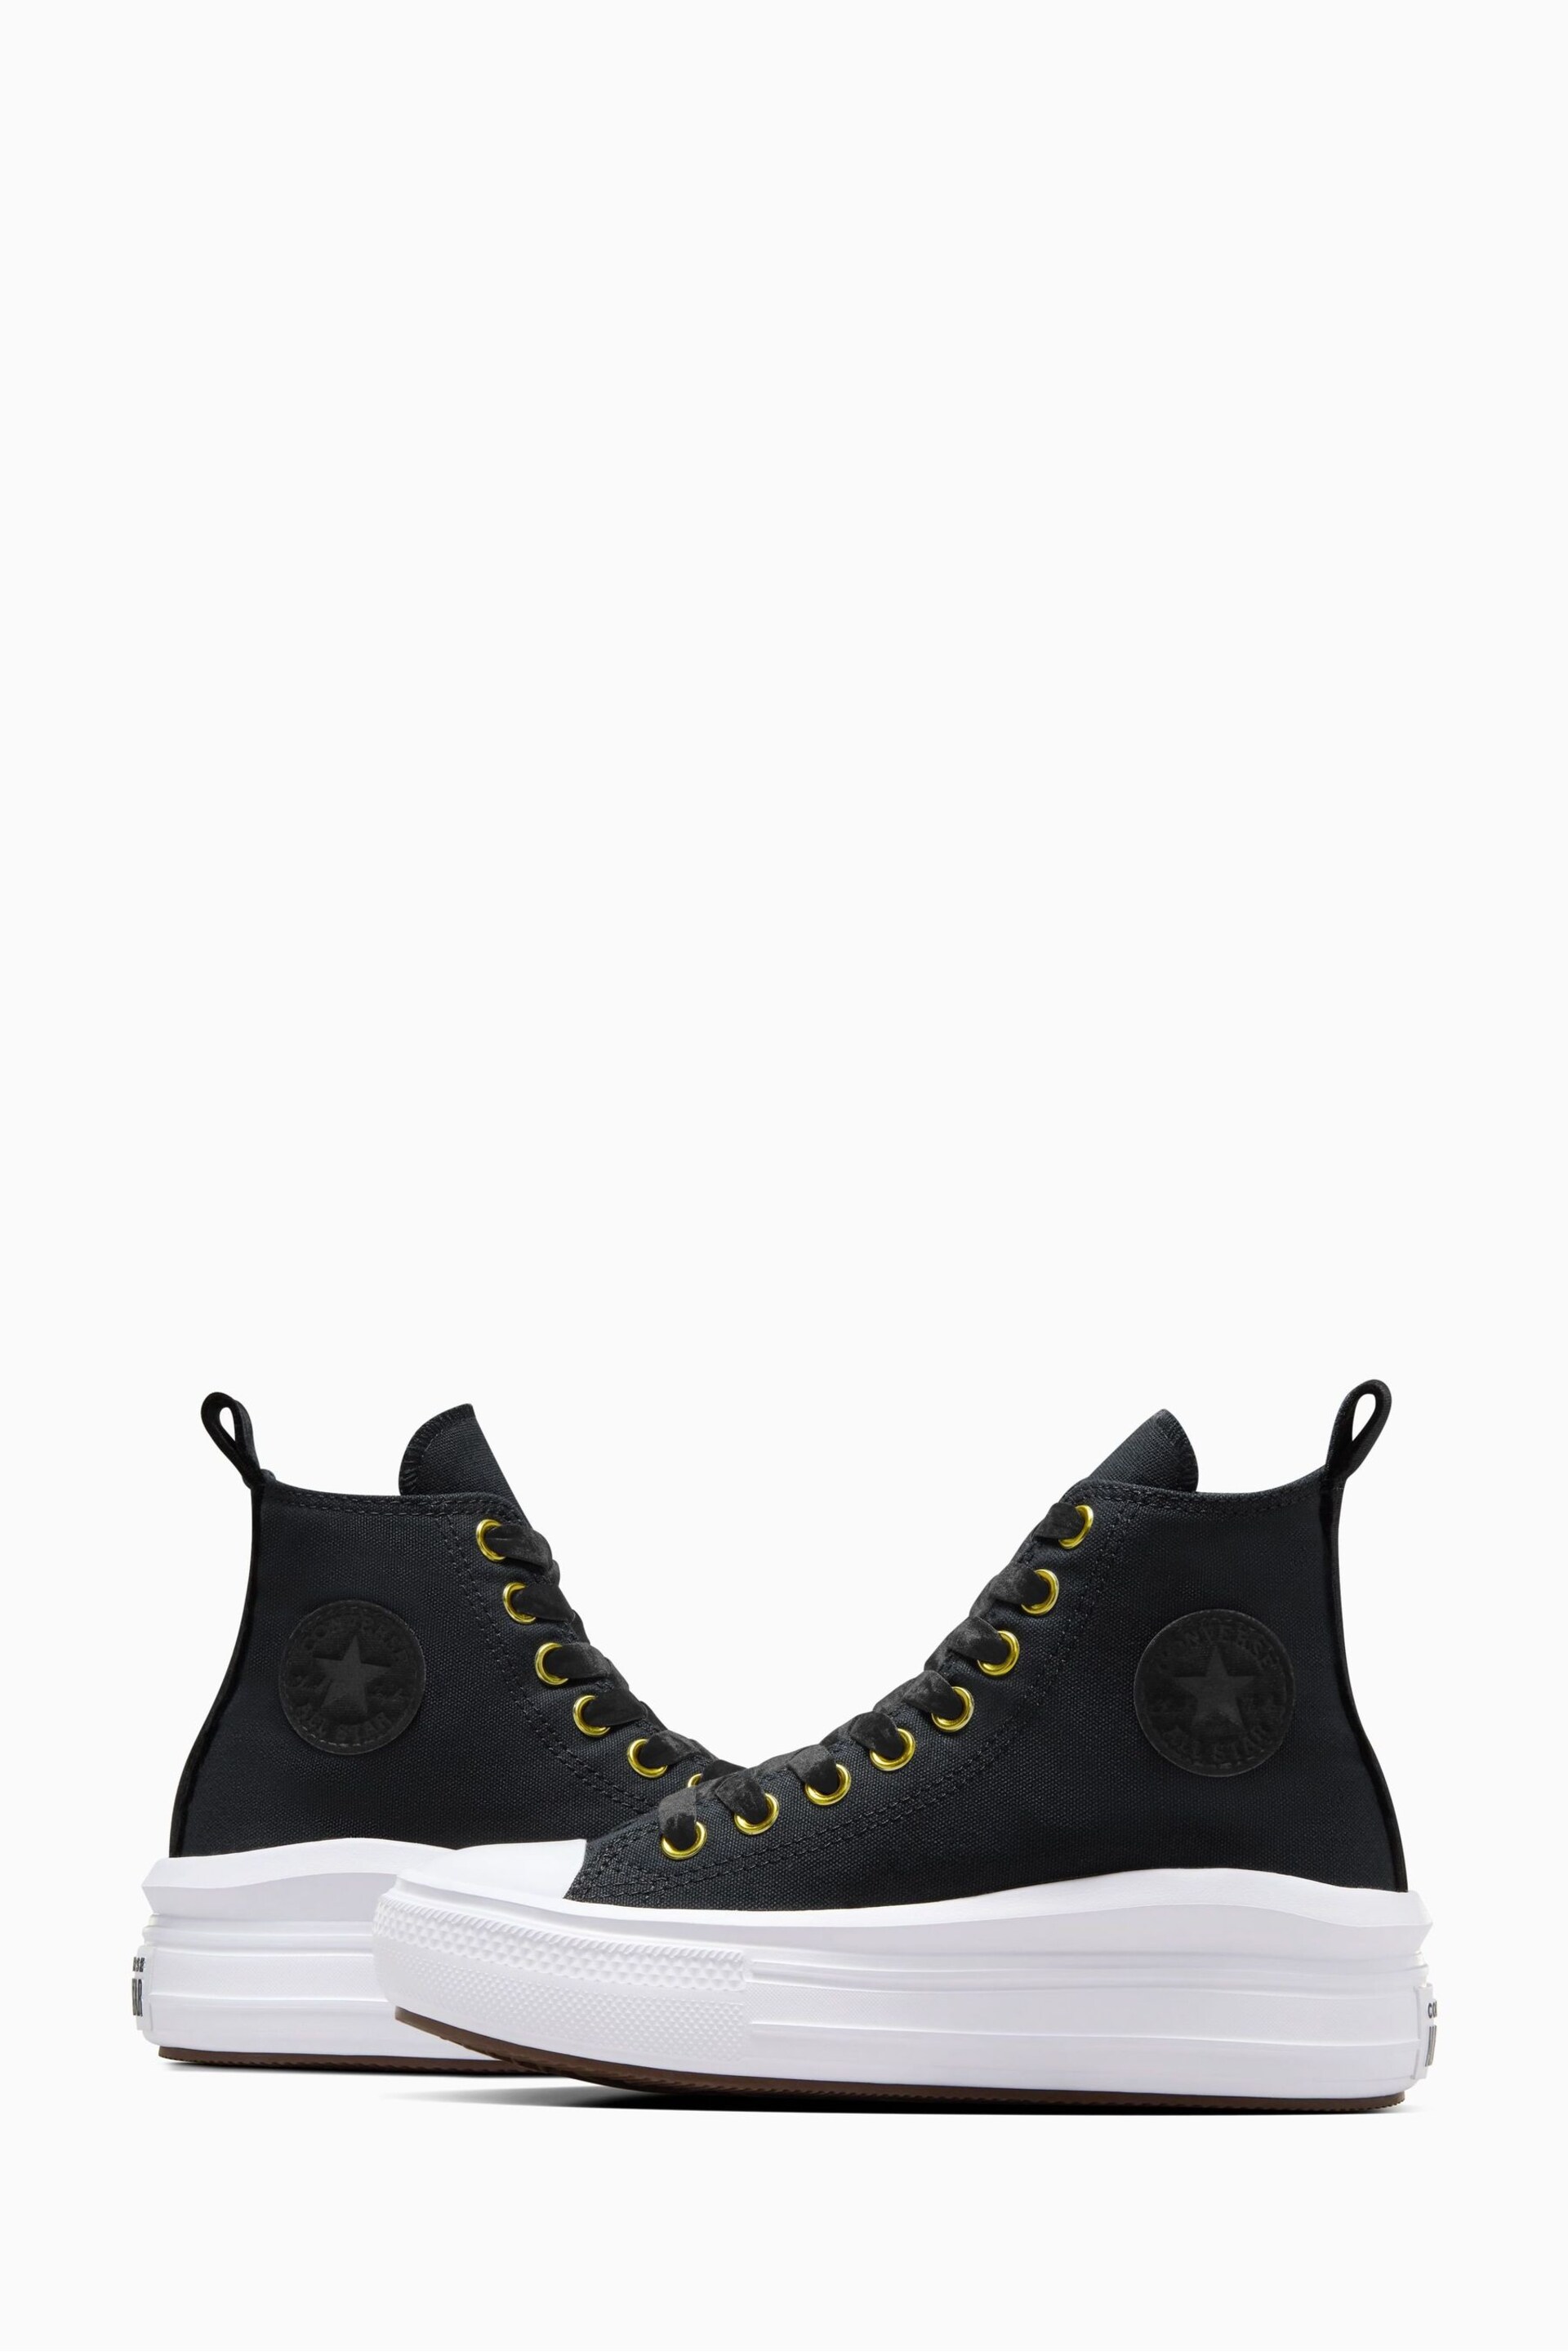 Converse Black Velvet Move Youth Trainers - Image 7 of 14